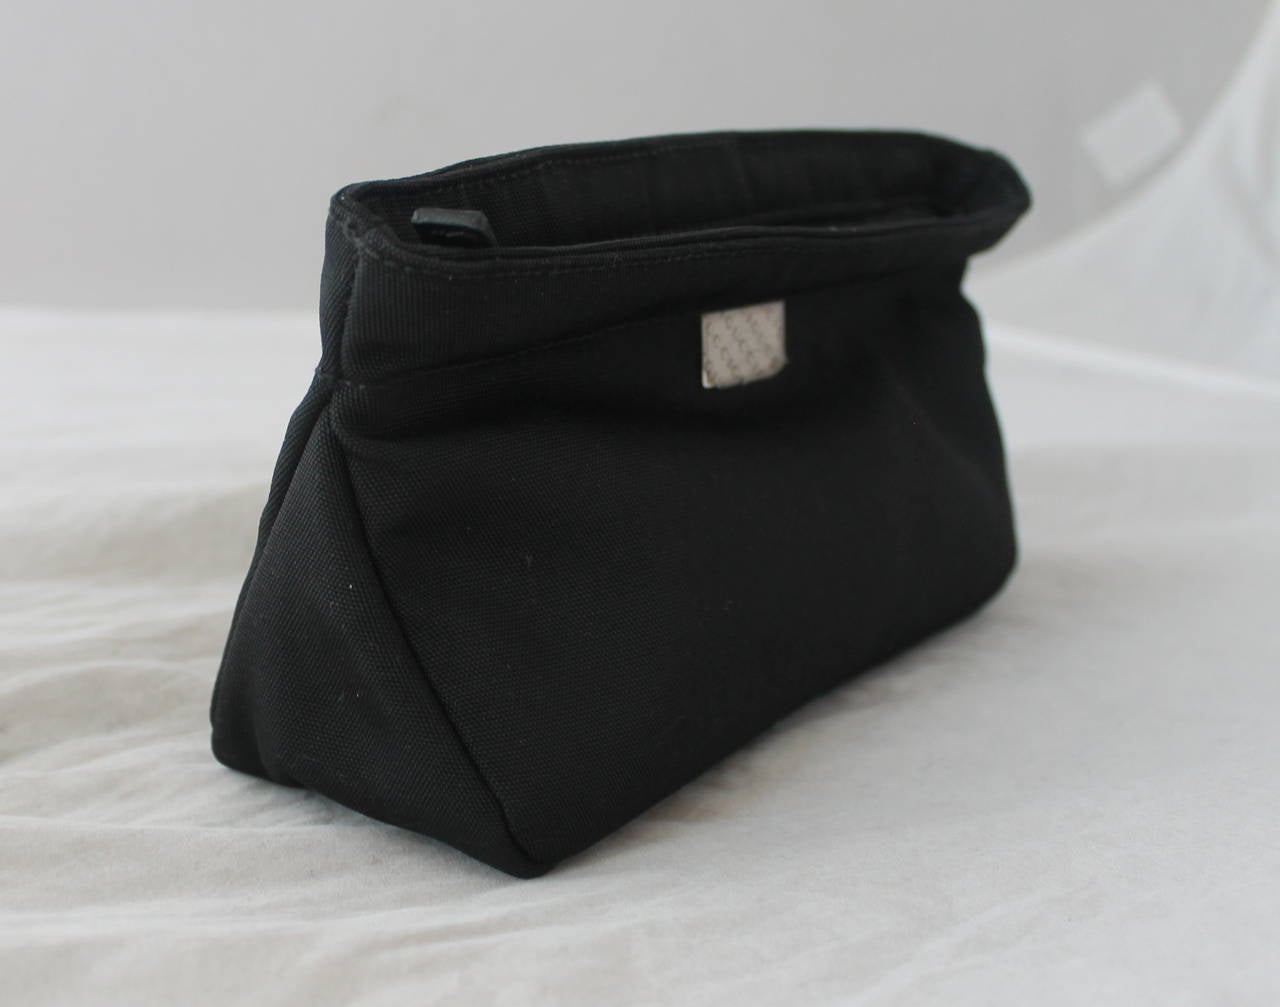 Gucci Black Nylon Solid Cosmetic Case. This case is in very good condition with the plastic still on the hardware. There is minor wear on the outside from sitting around. 

Height- 4.5